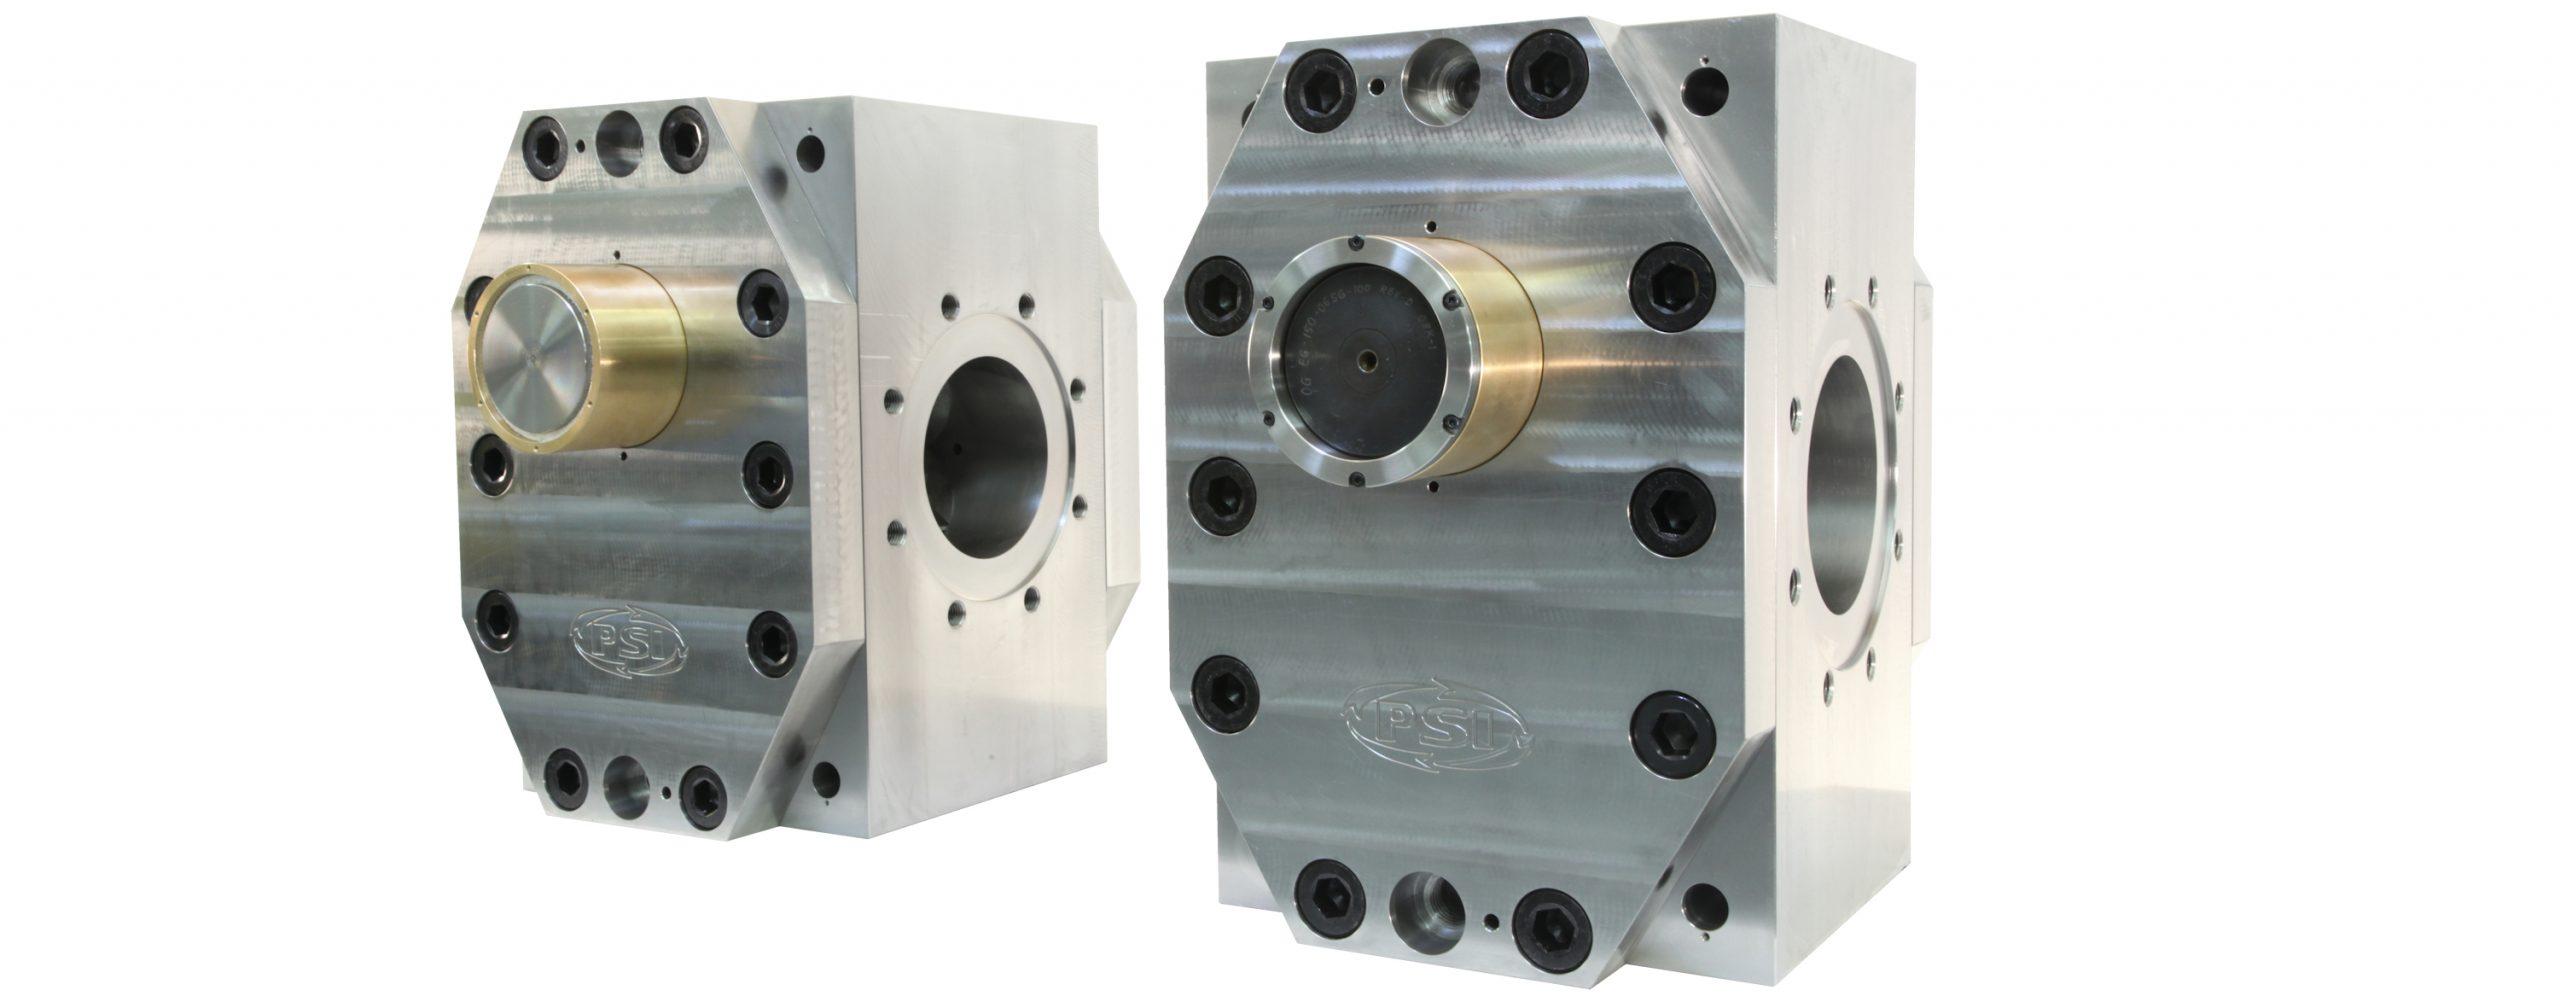 Product High Pressure Gear Pump (HGP) - PSI-Polymer Systems image